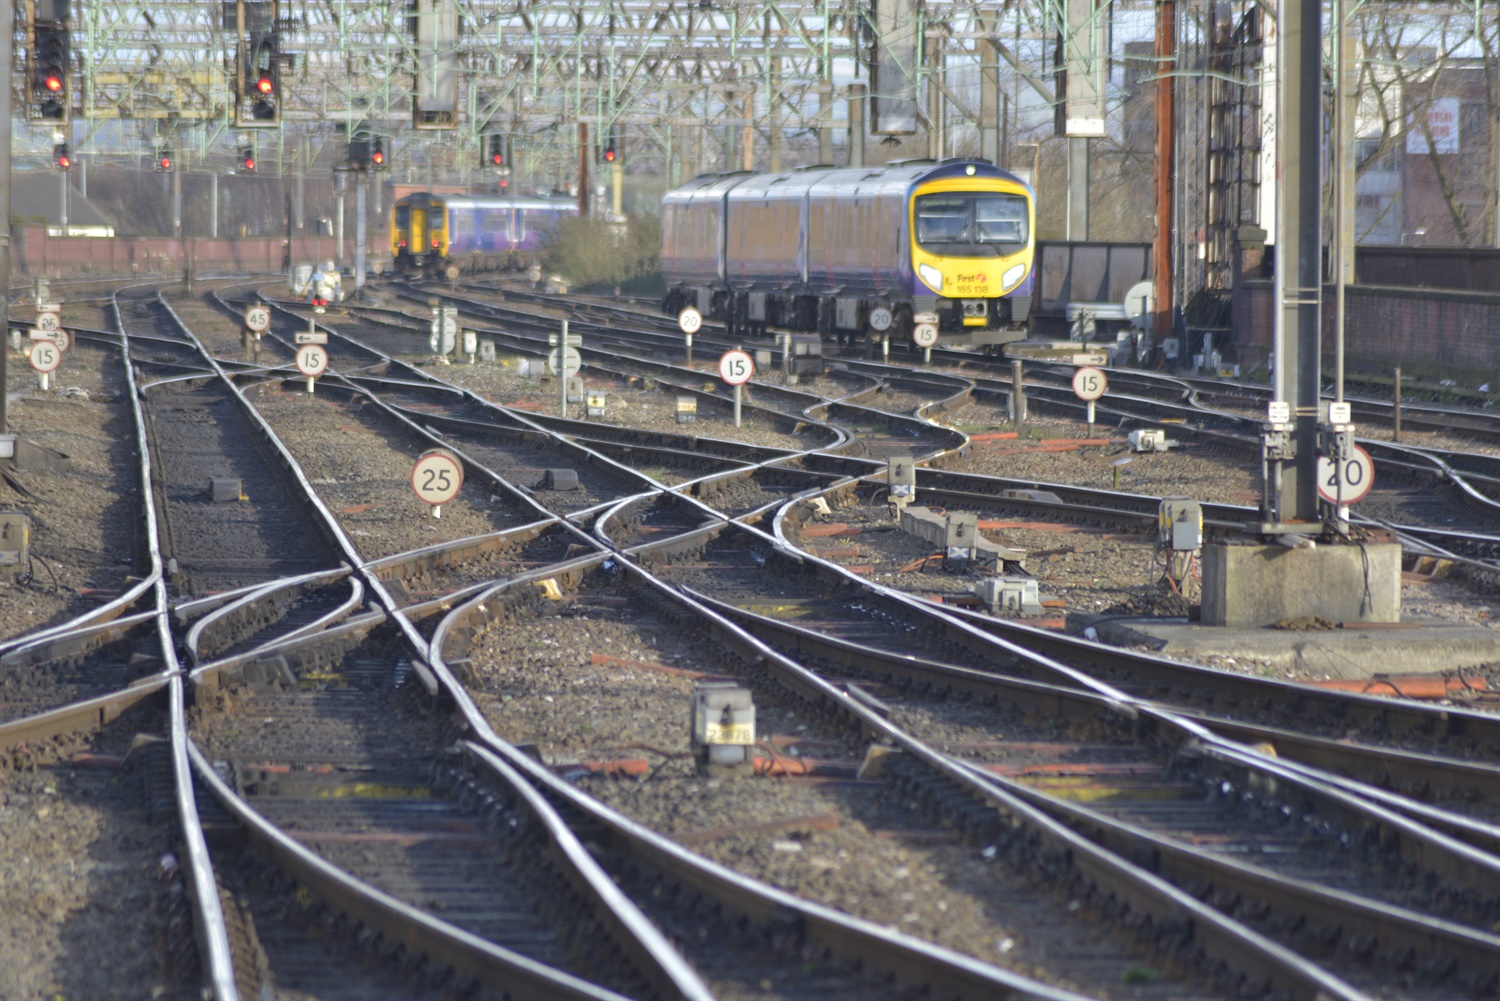 TransPennine upgrade works will shut down route for almost five years